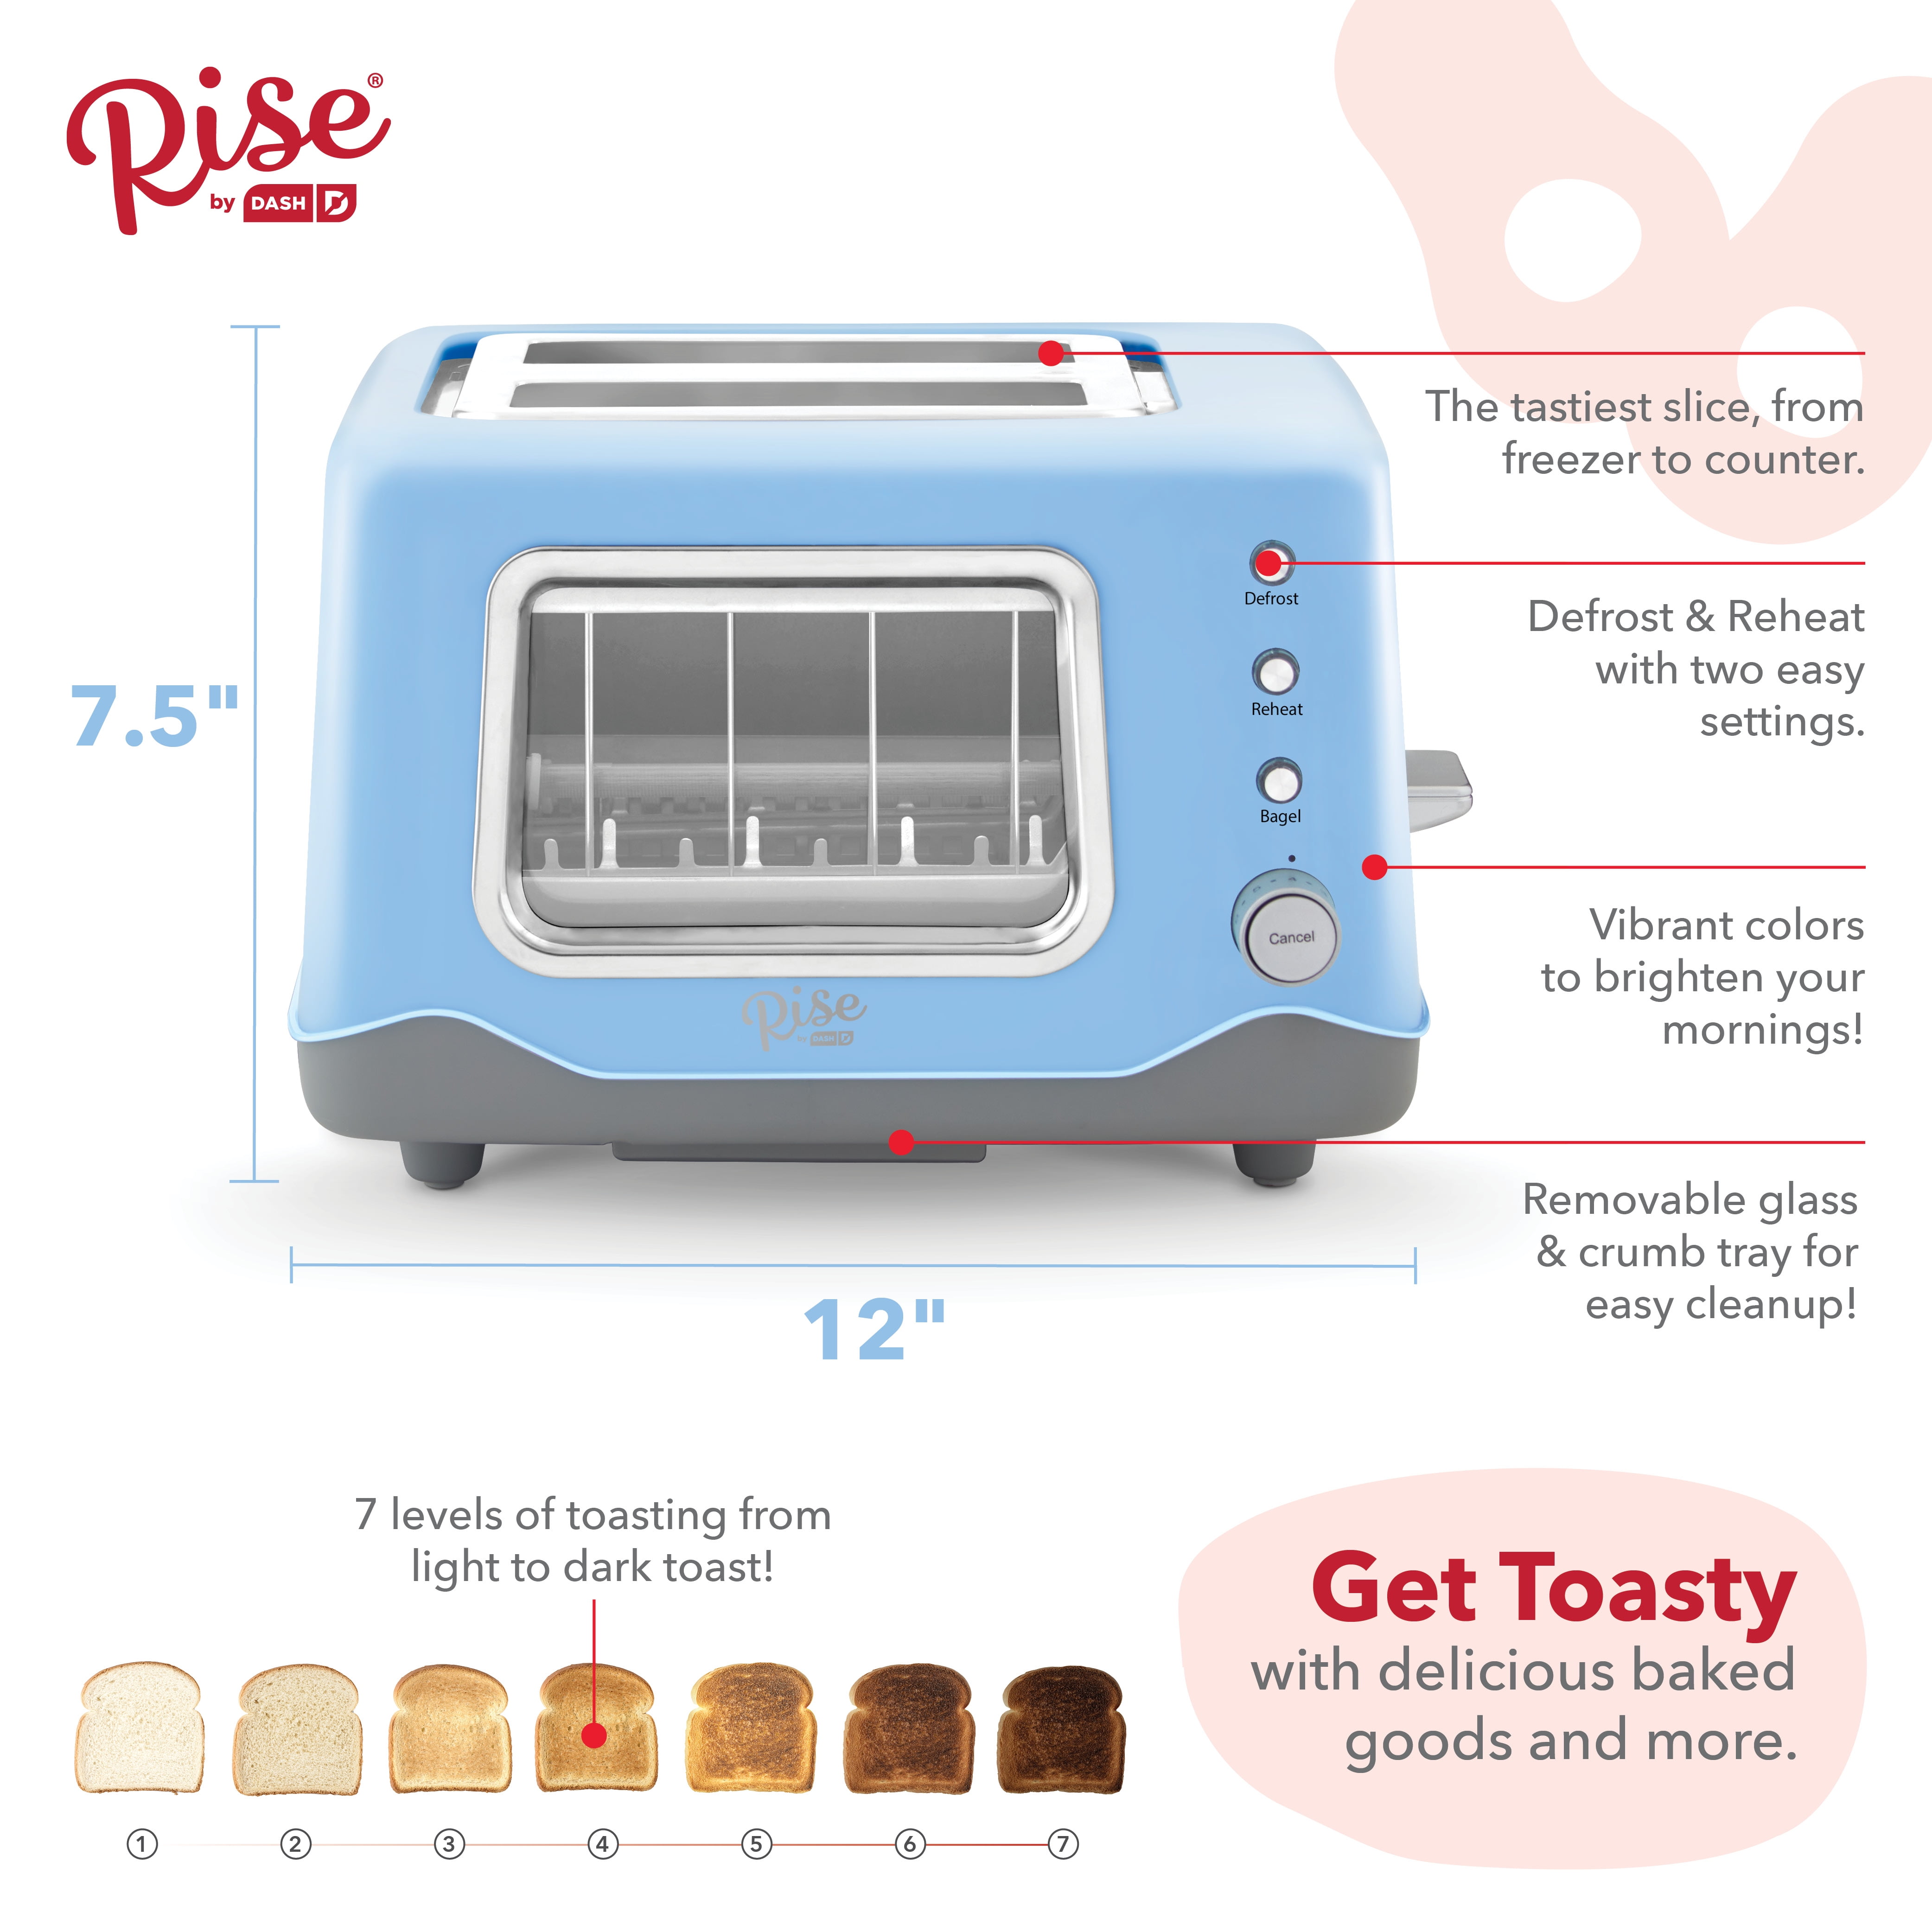 1 Homewell 2 Slice Long Slot Clear View Toaster With Slide Out Glass Panels  & 7 Toast Settings, Perfect For Bagels, Specialty Brea